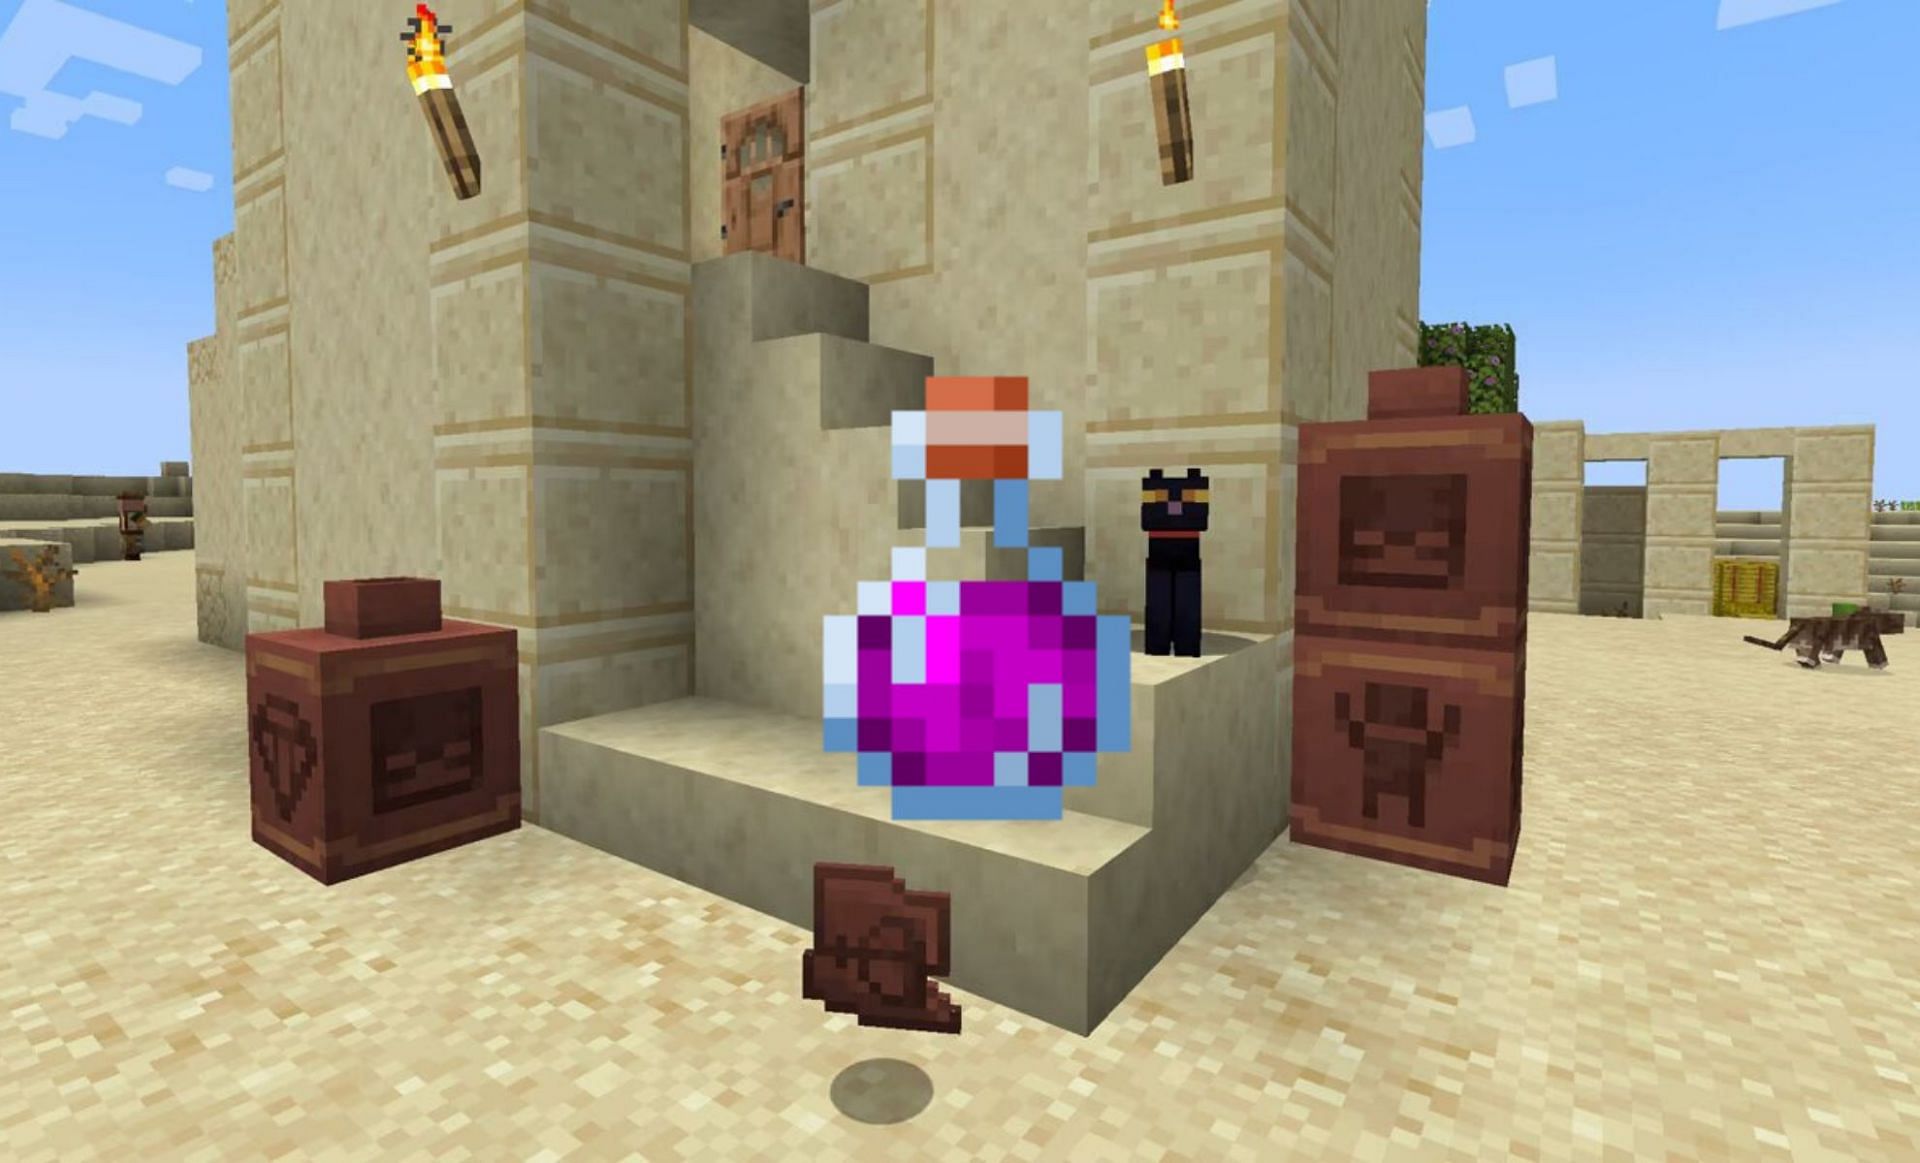 Potions got a redesign (Image via Minecraft Wiki)